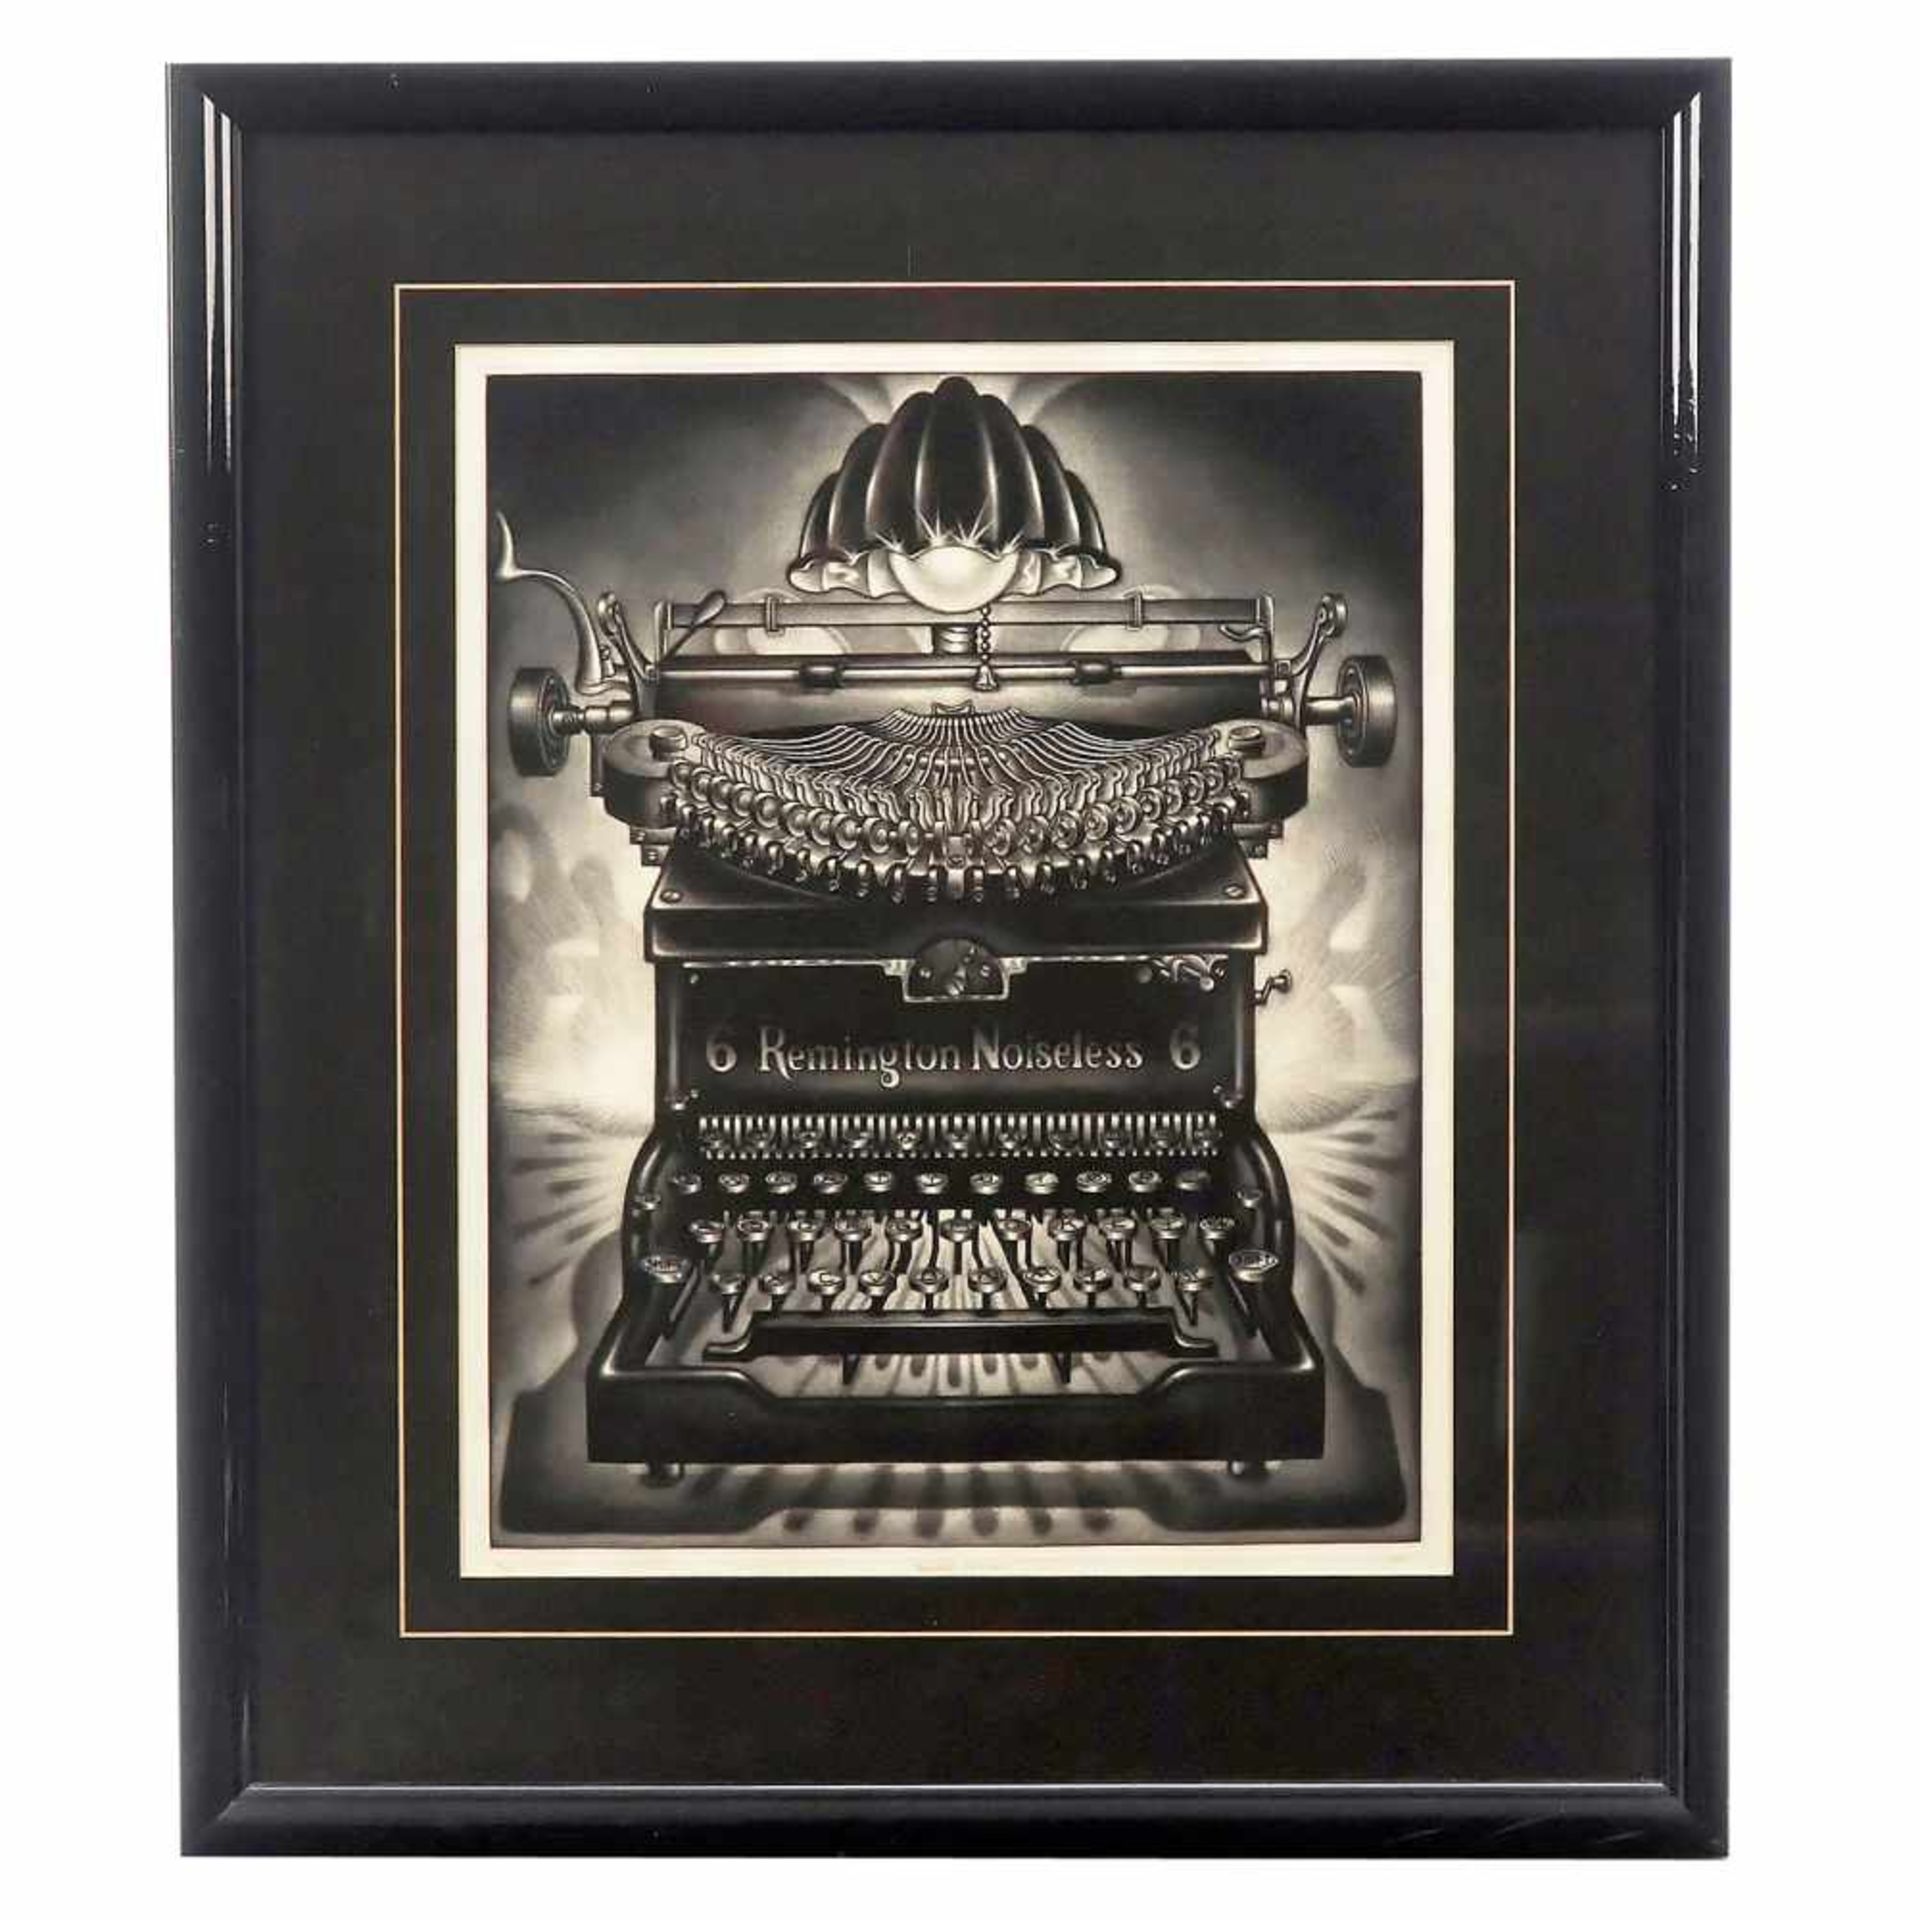 Etching "Remington Noiseless" by Carol Wax, 1986Mezzotint, no. 44 of 75, lower right with signature,